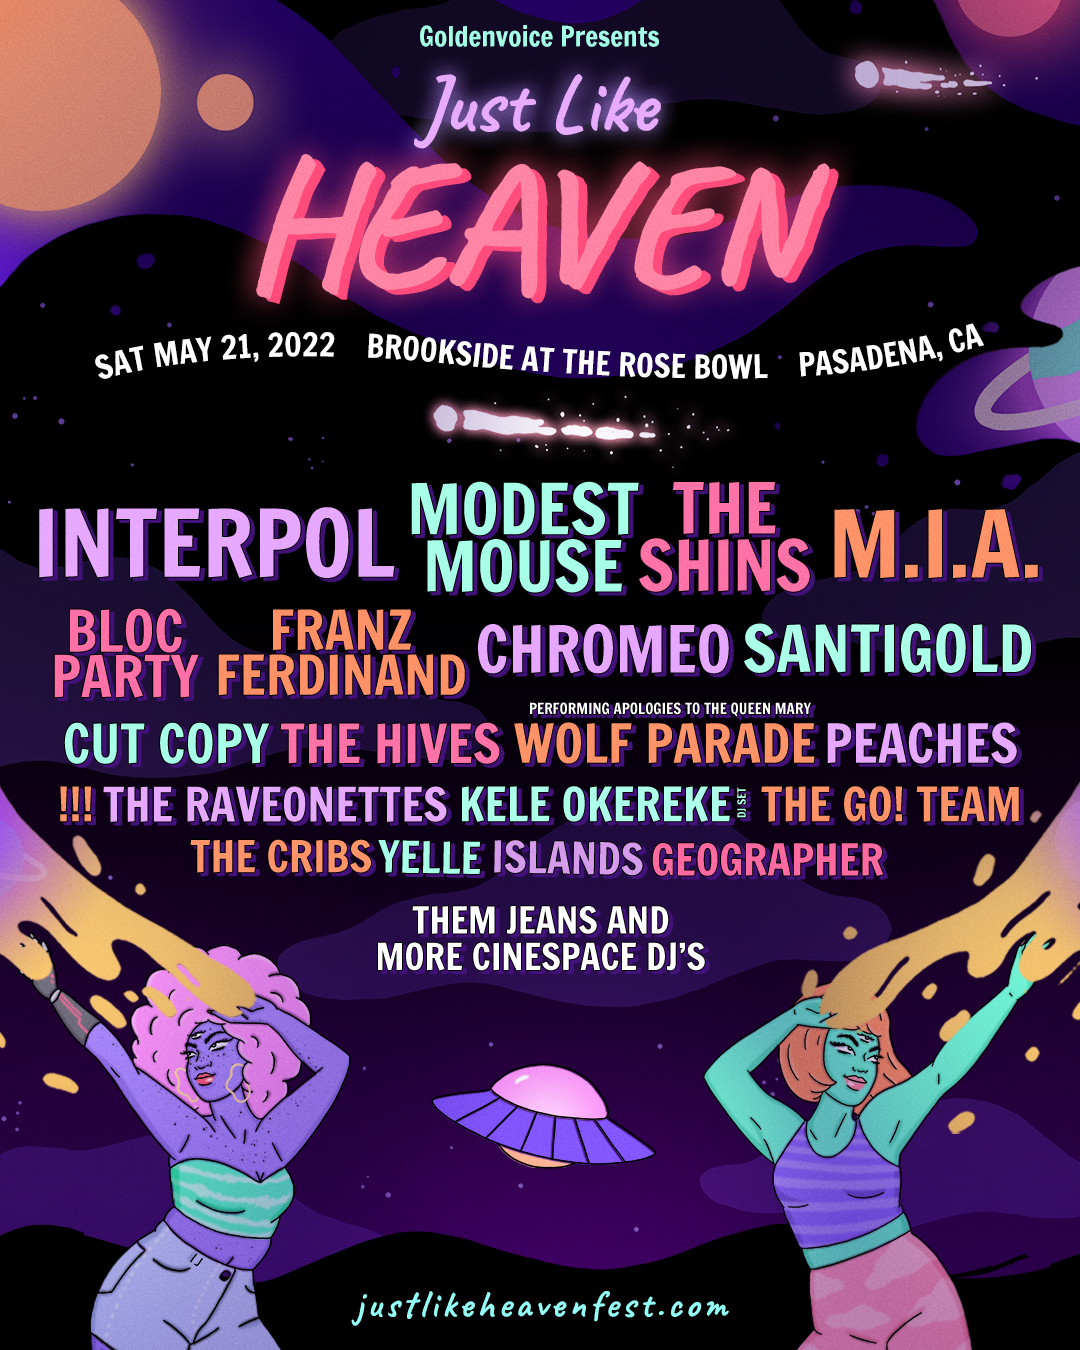 Just Like Heaven Poster featuring the full lineup